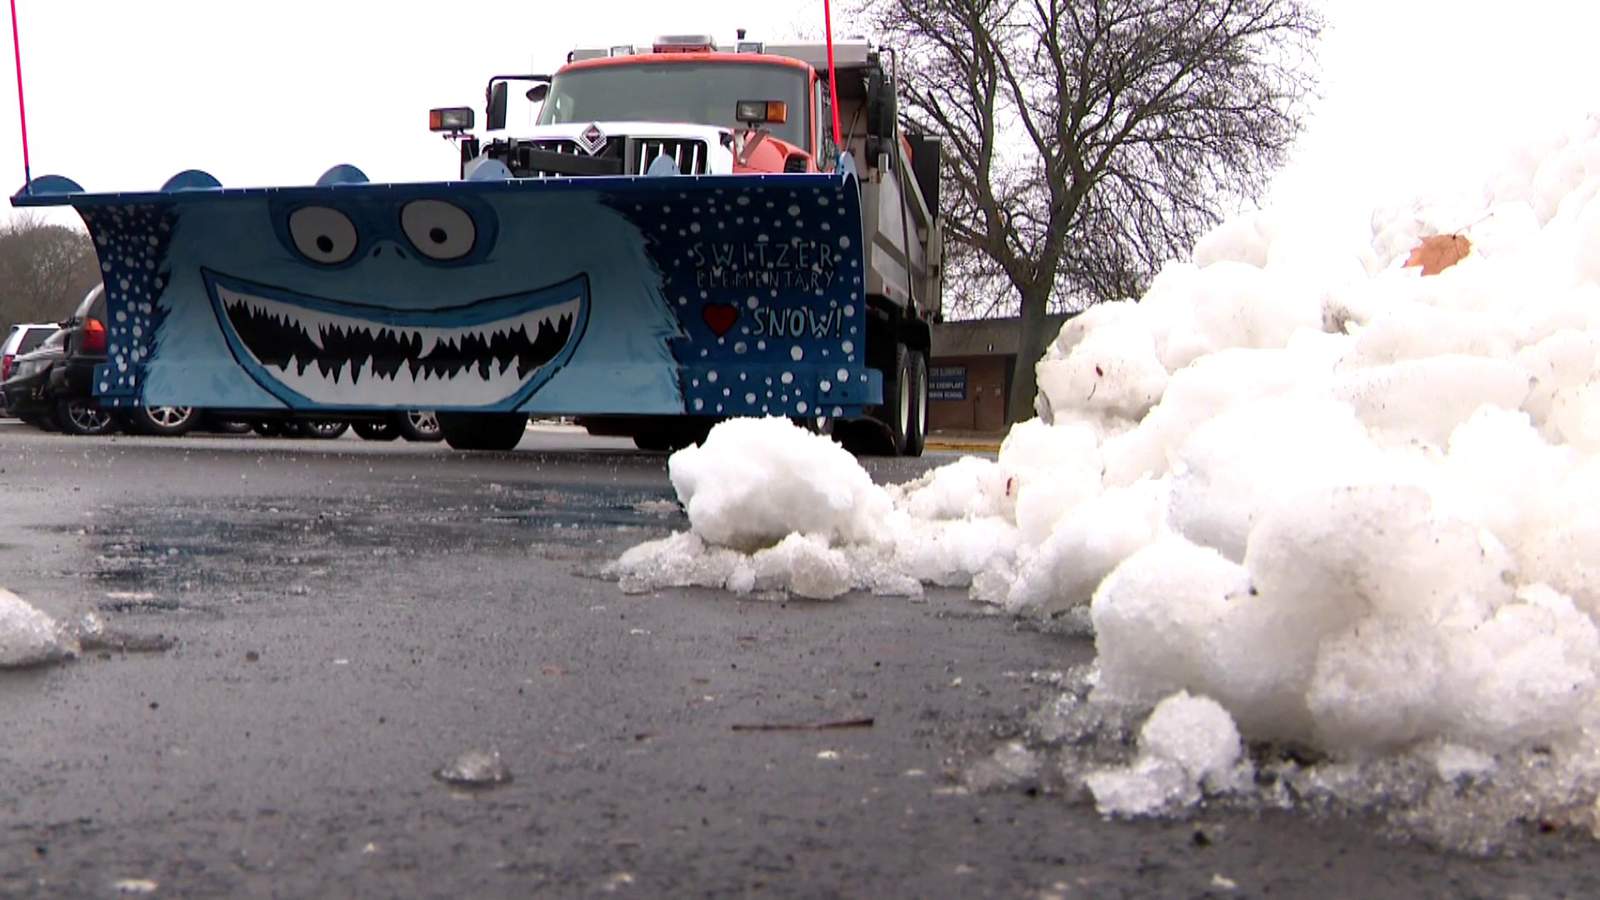 Elementary students paint 5th grader’s drawing on Macomb County snowplow